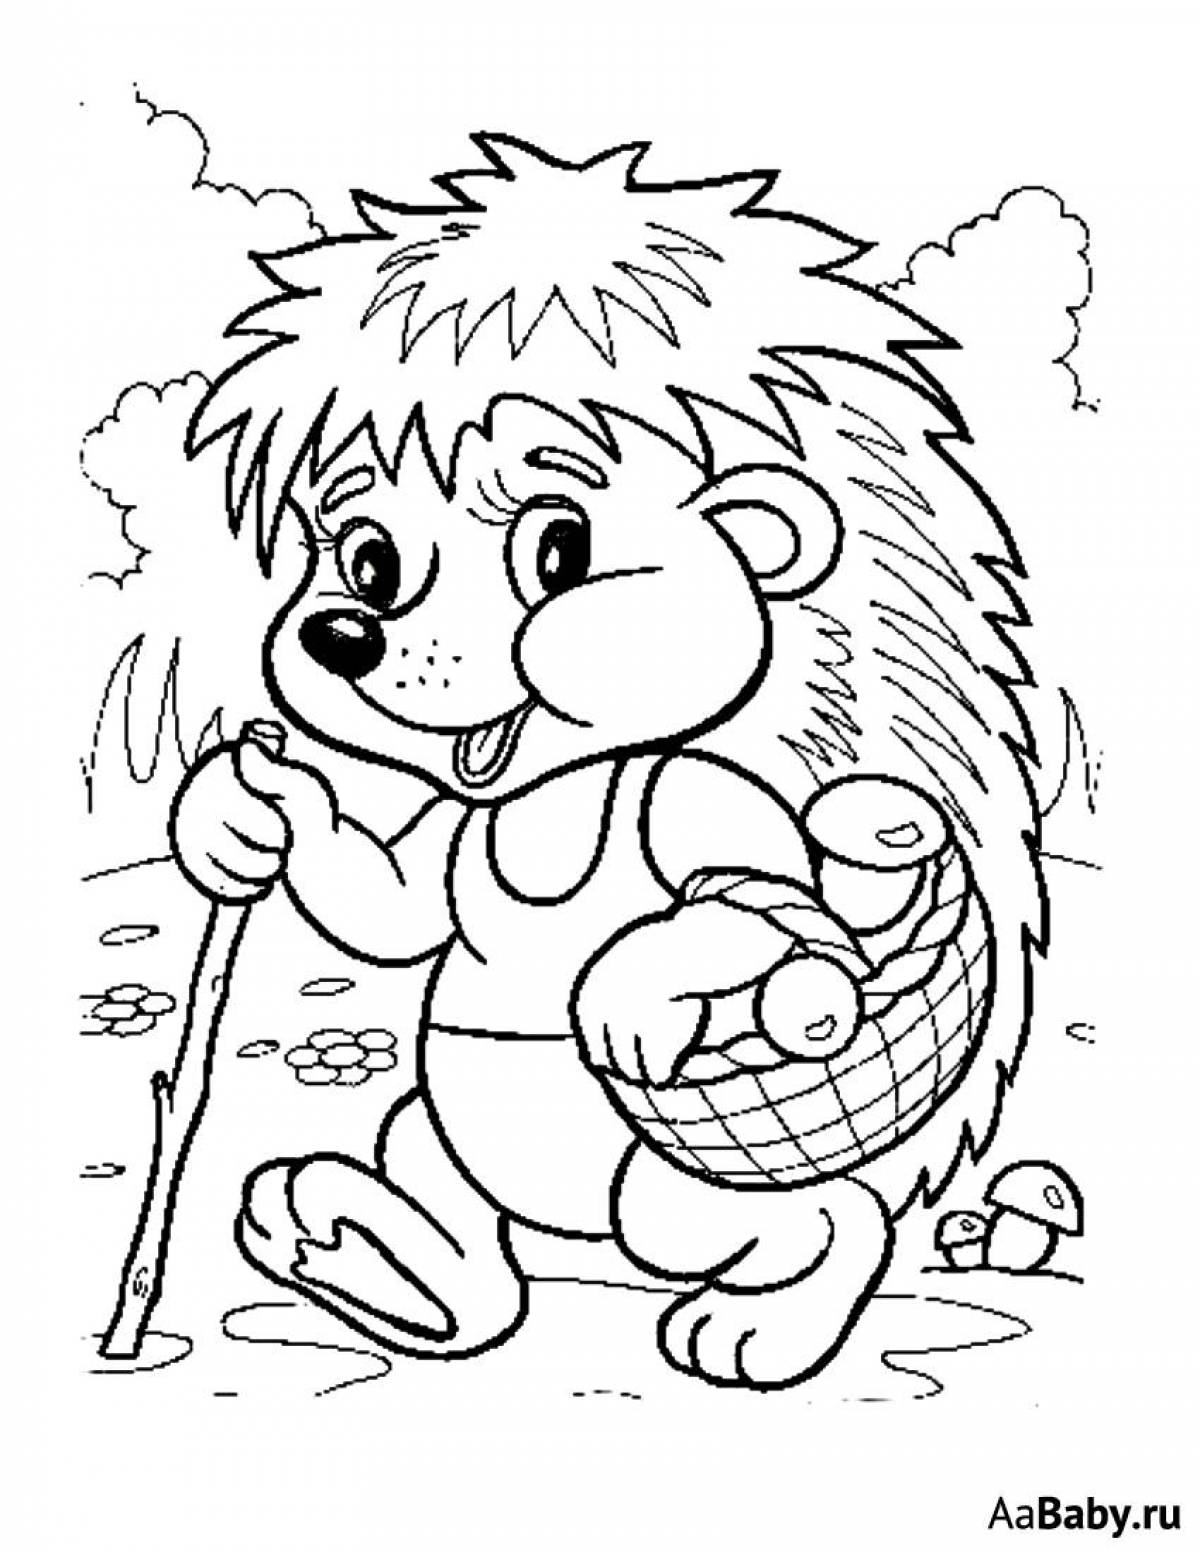 Awesome hedgehog coloring book for kids